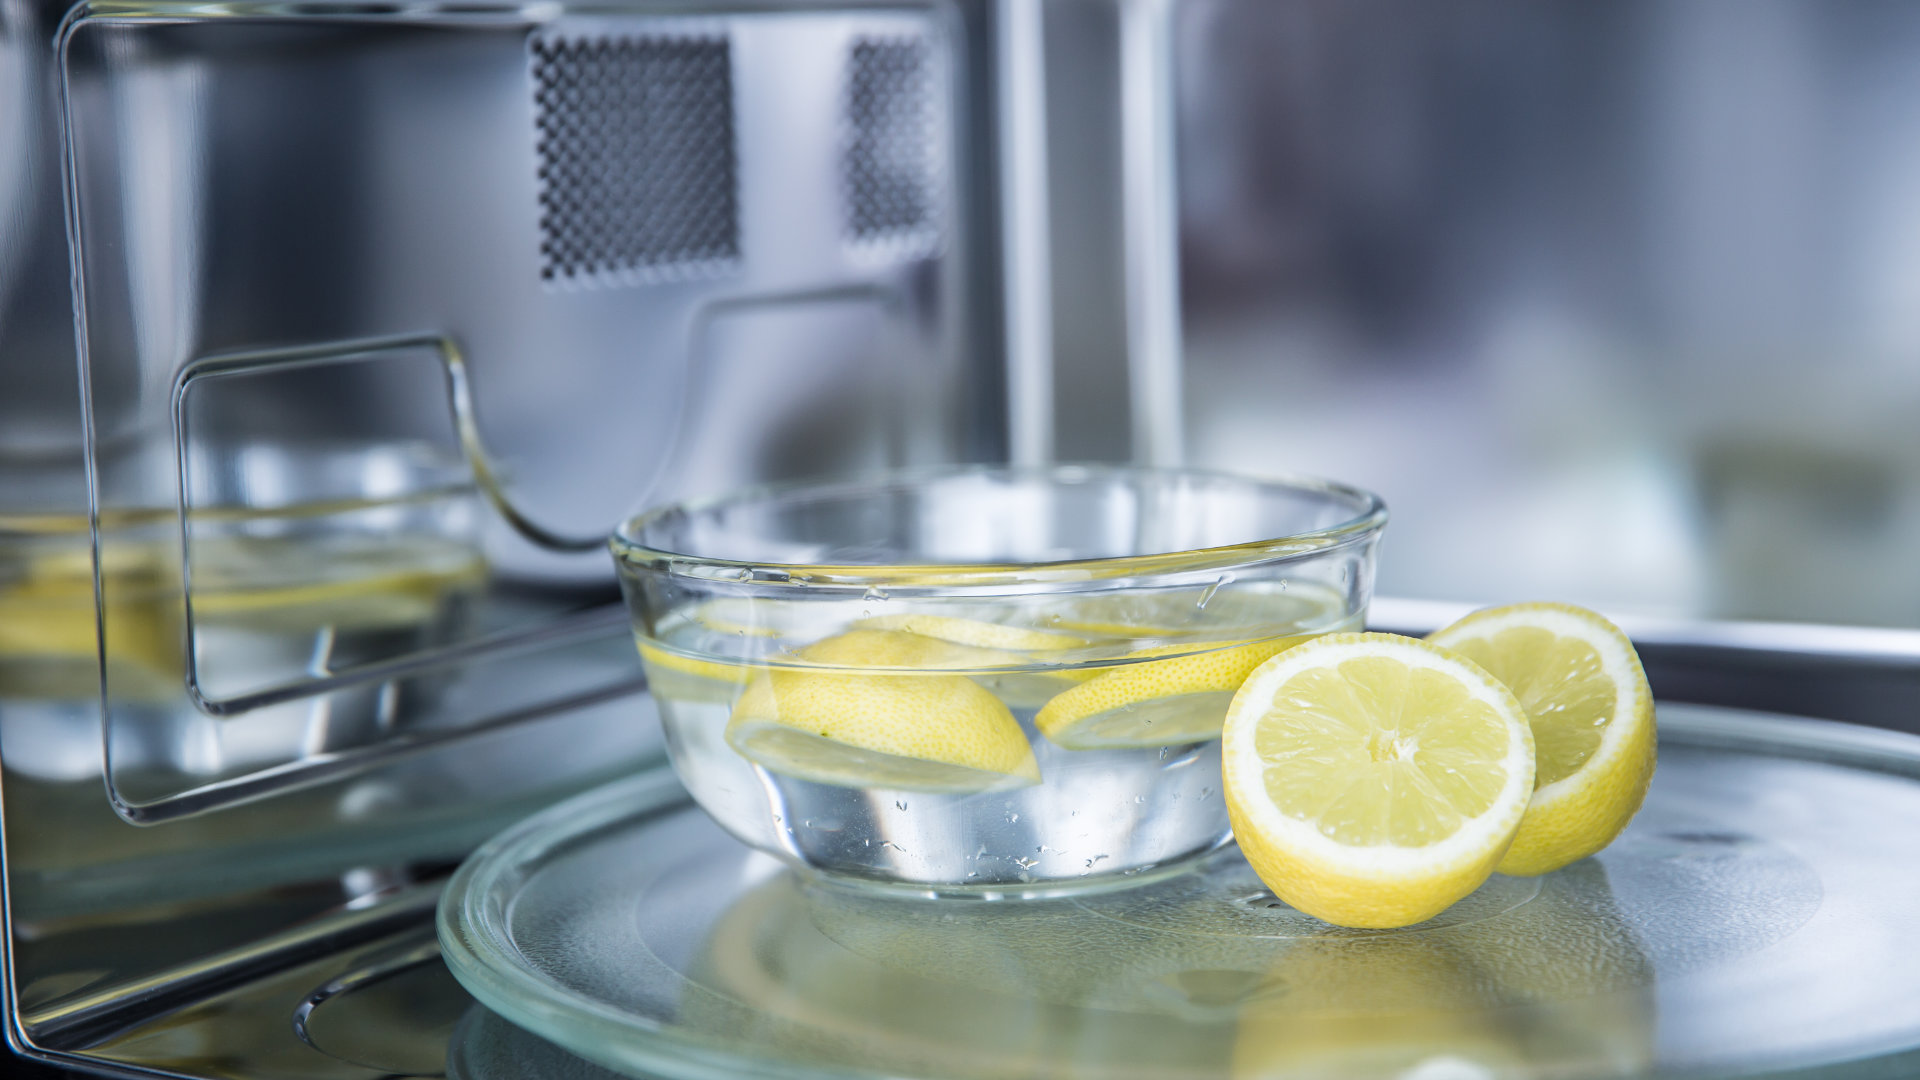 Featured image for “How to Clean a Microwave with Lemon”